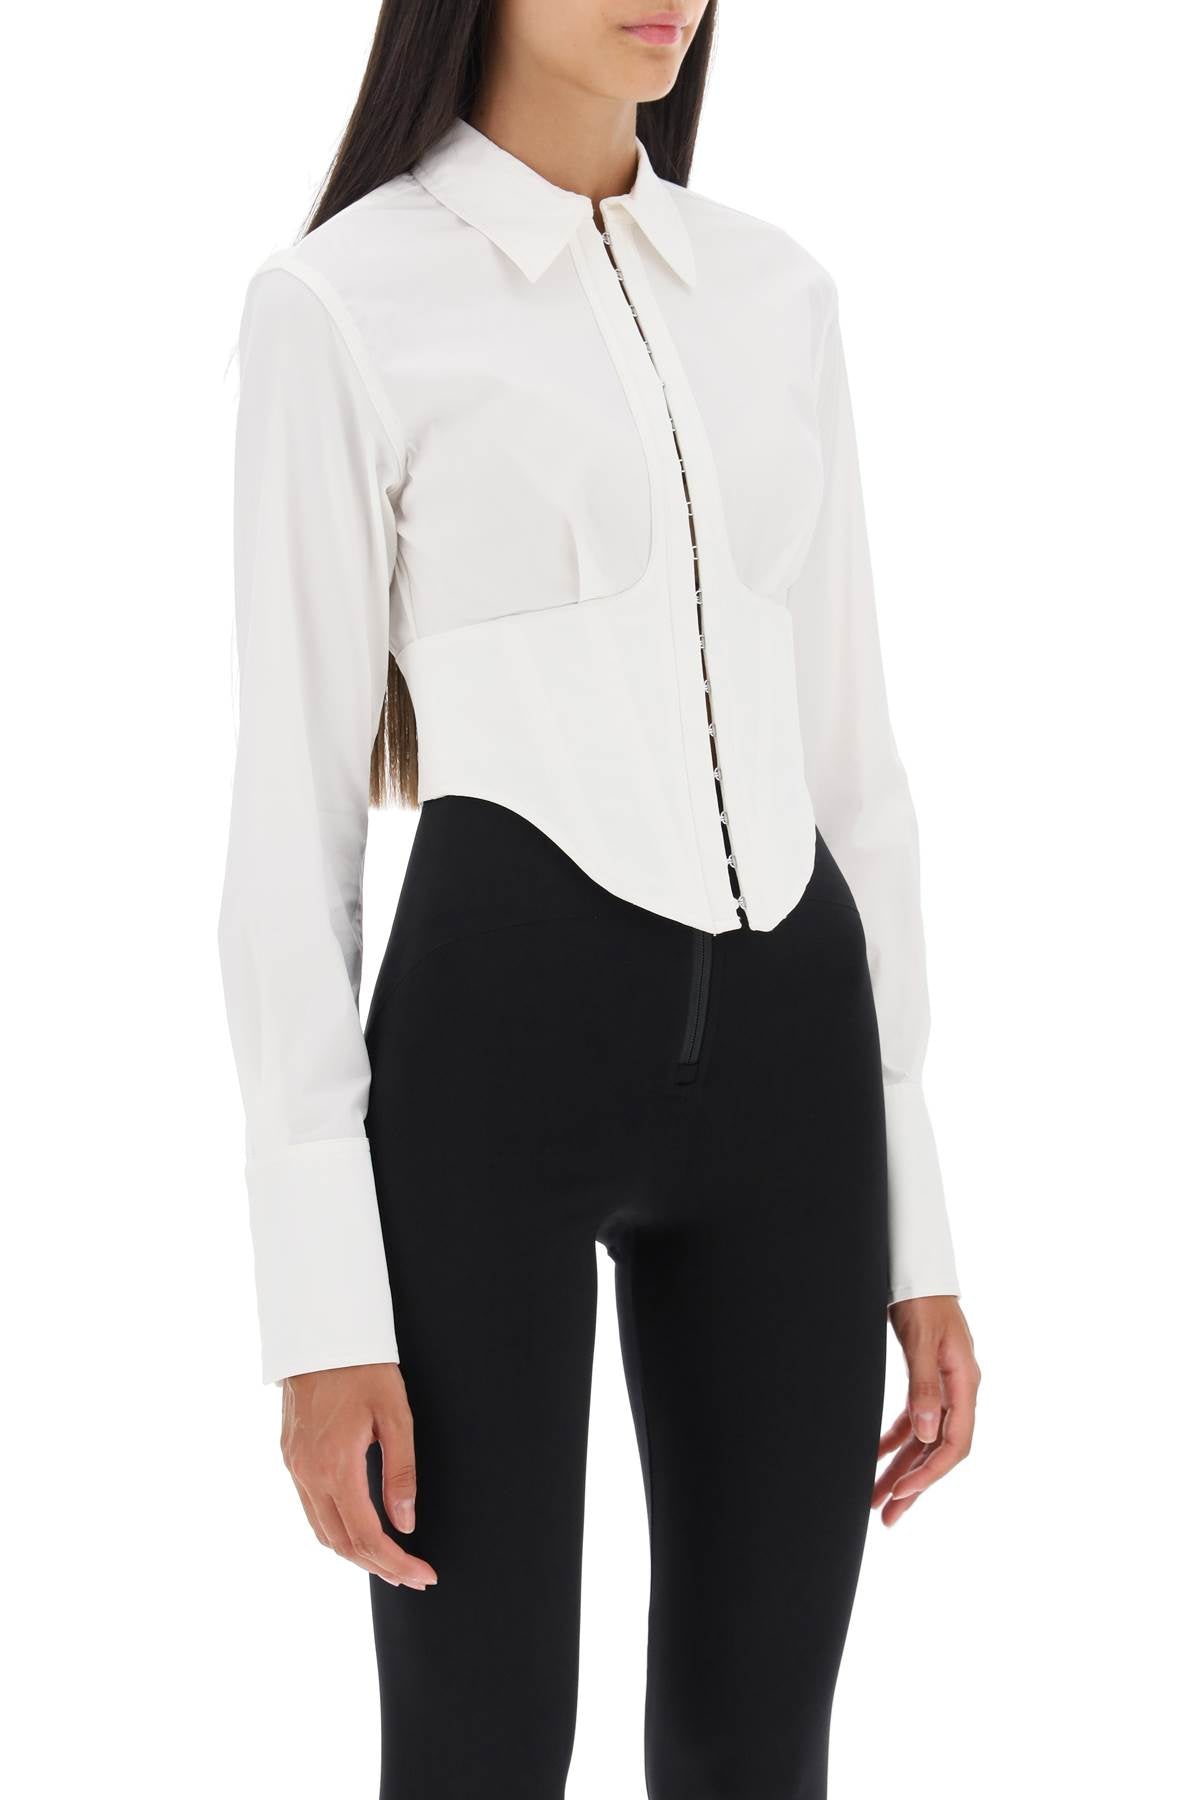 Dion lee cropped shirt with underbust corset-1